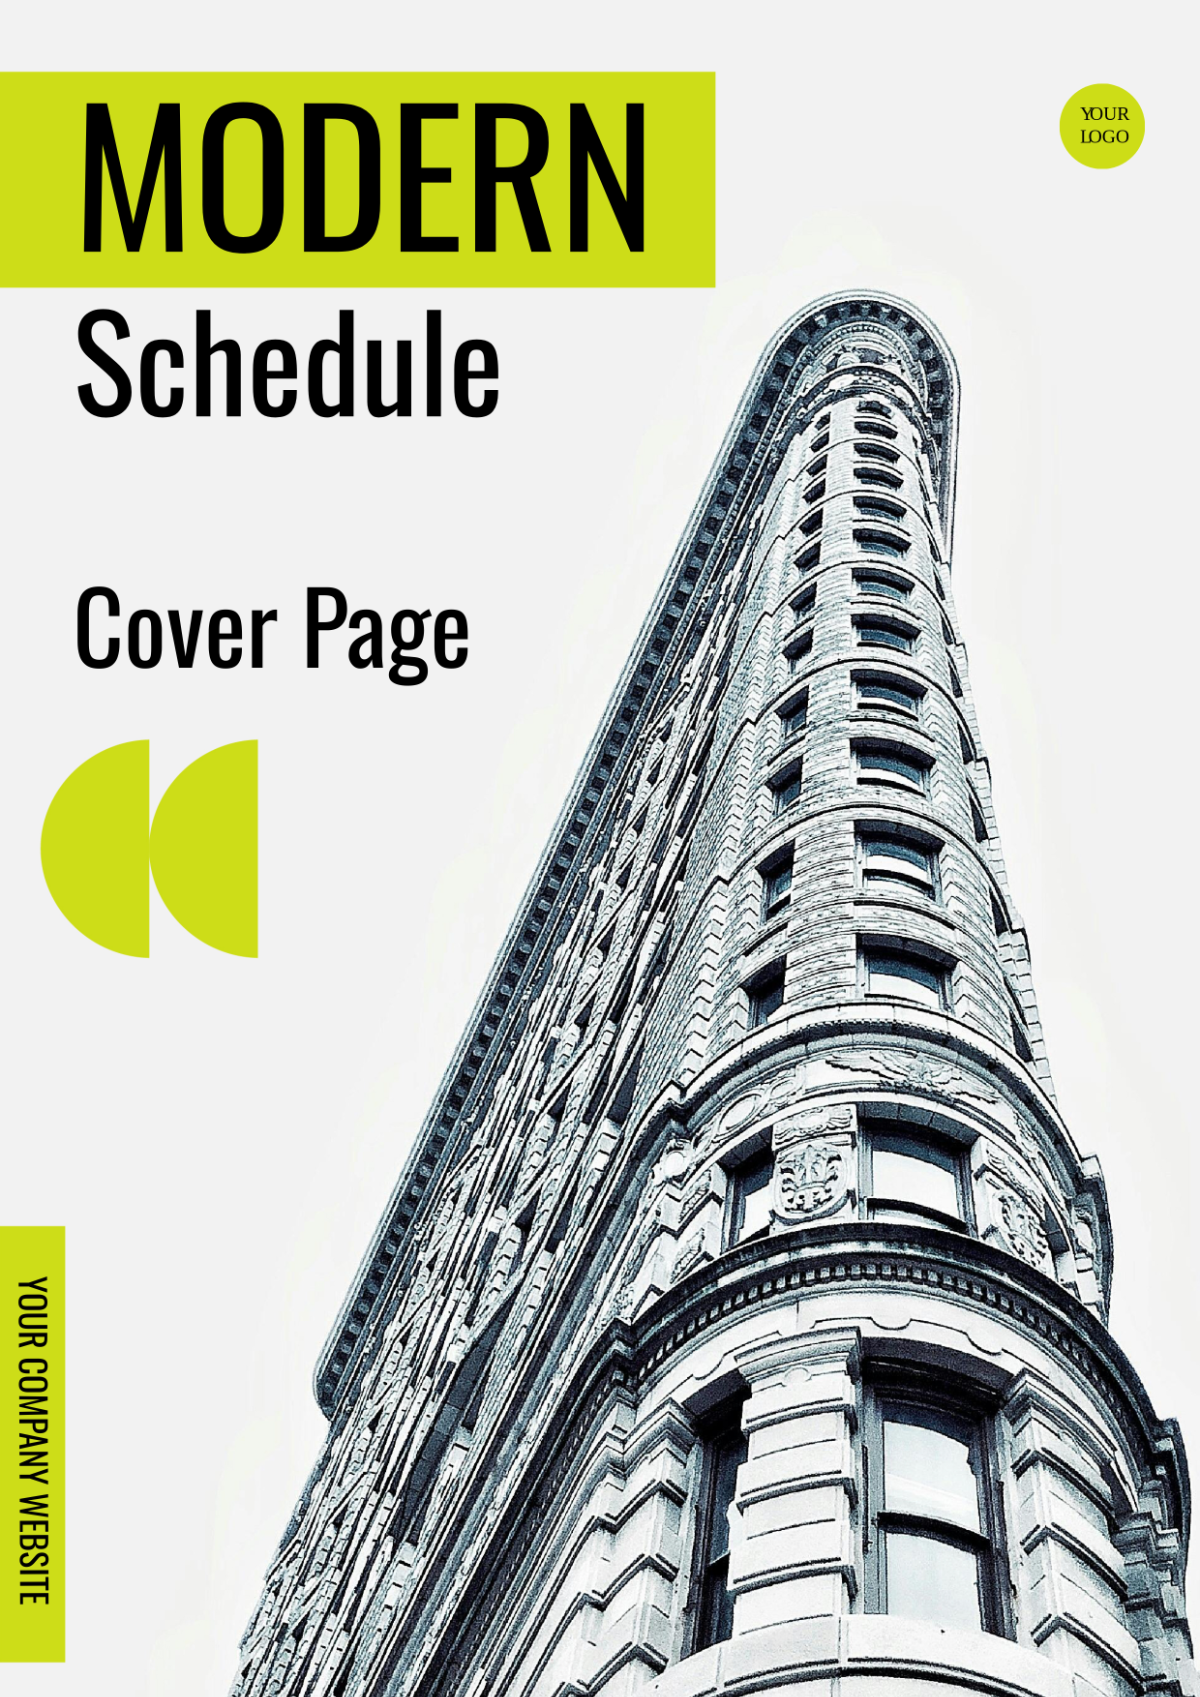 Modern Schedule Cover Page